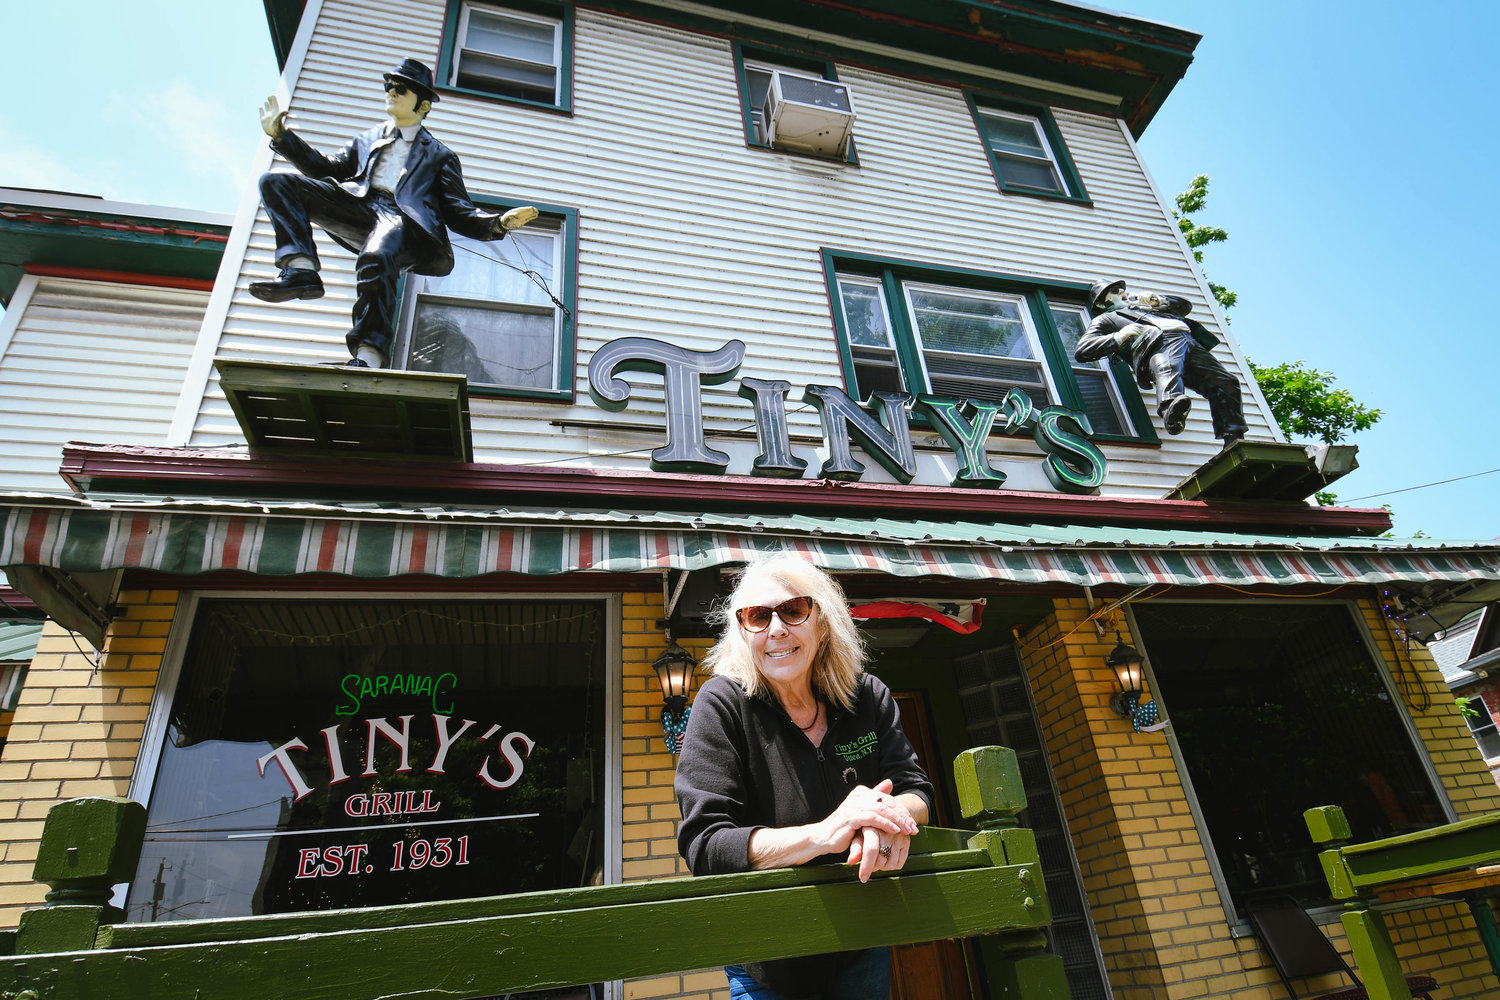 Joanne Gerace, owner of Tiny’s Grill in Utica, is selling the establishment in hopes the new owner will keep the tradition and legacy of the business alive.